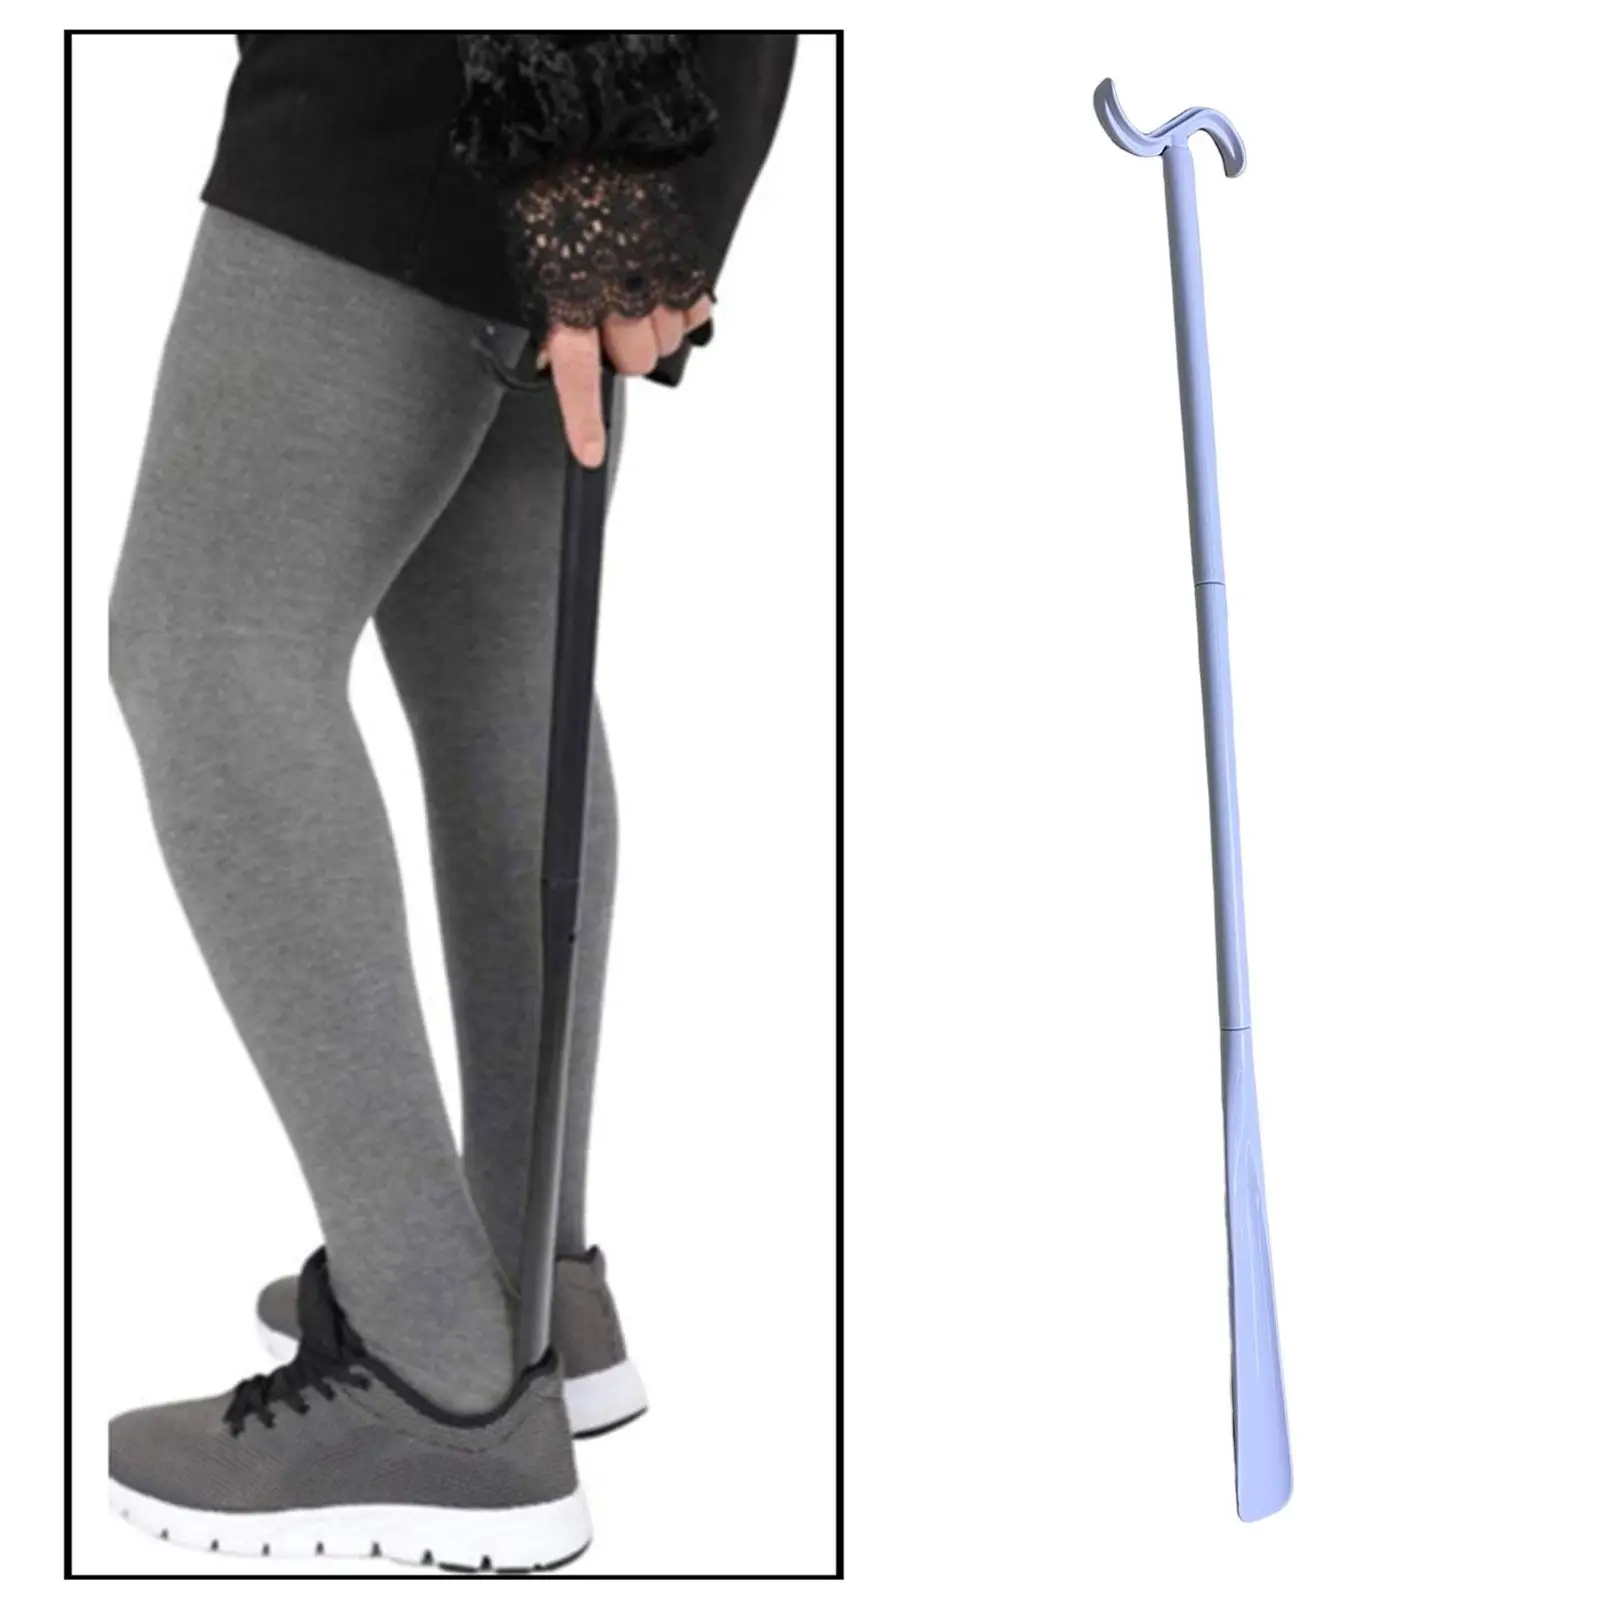 Dressing Stick Aid independently Living Aids Clothes Grabbers for Shoes Shirts Seniors